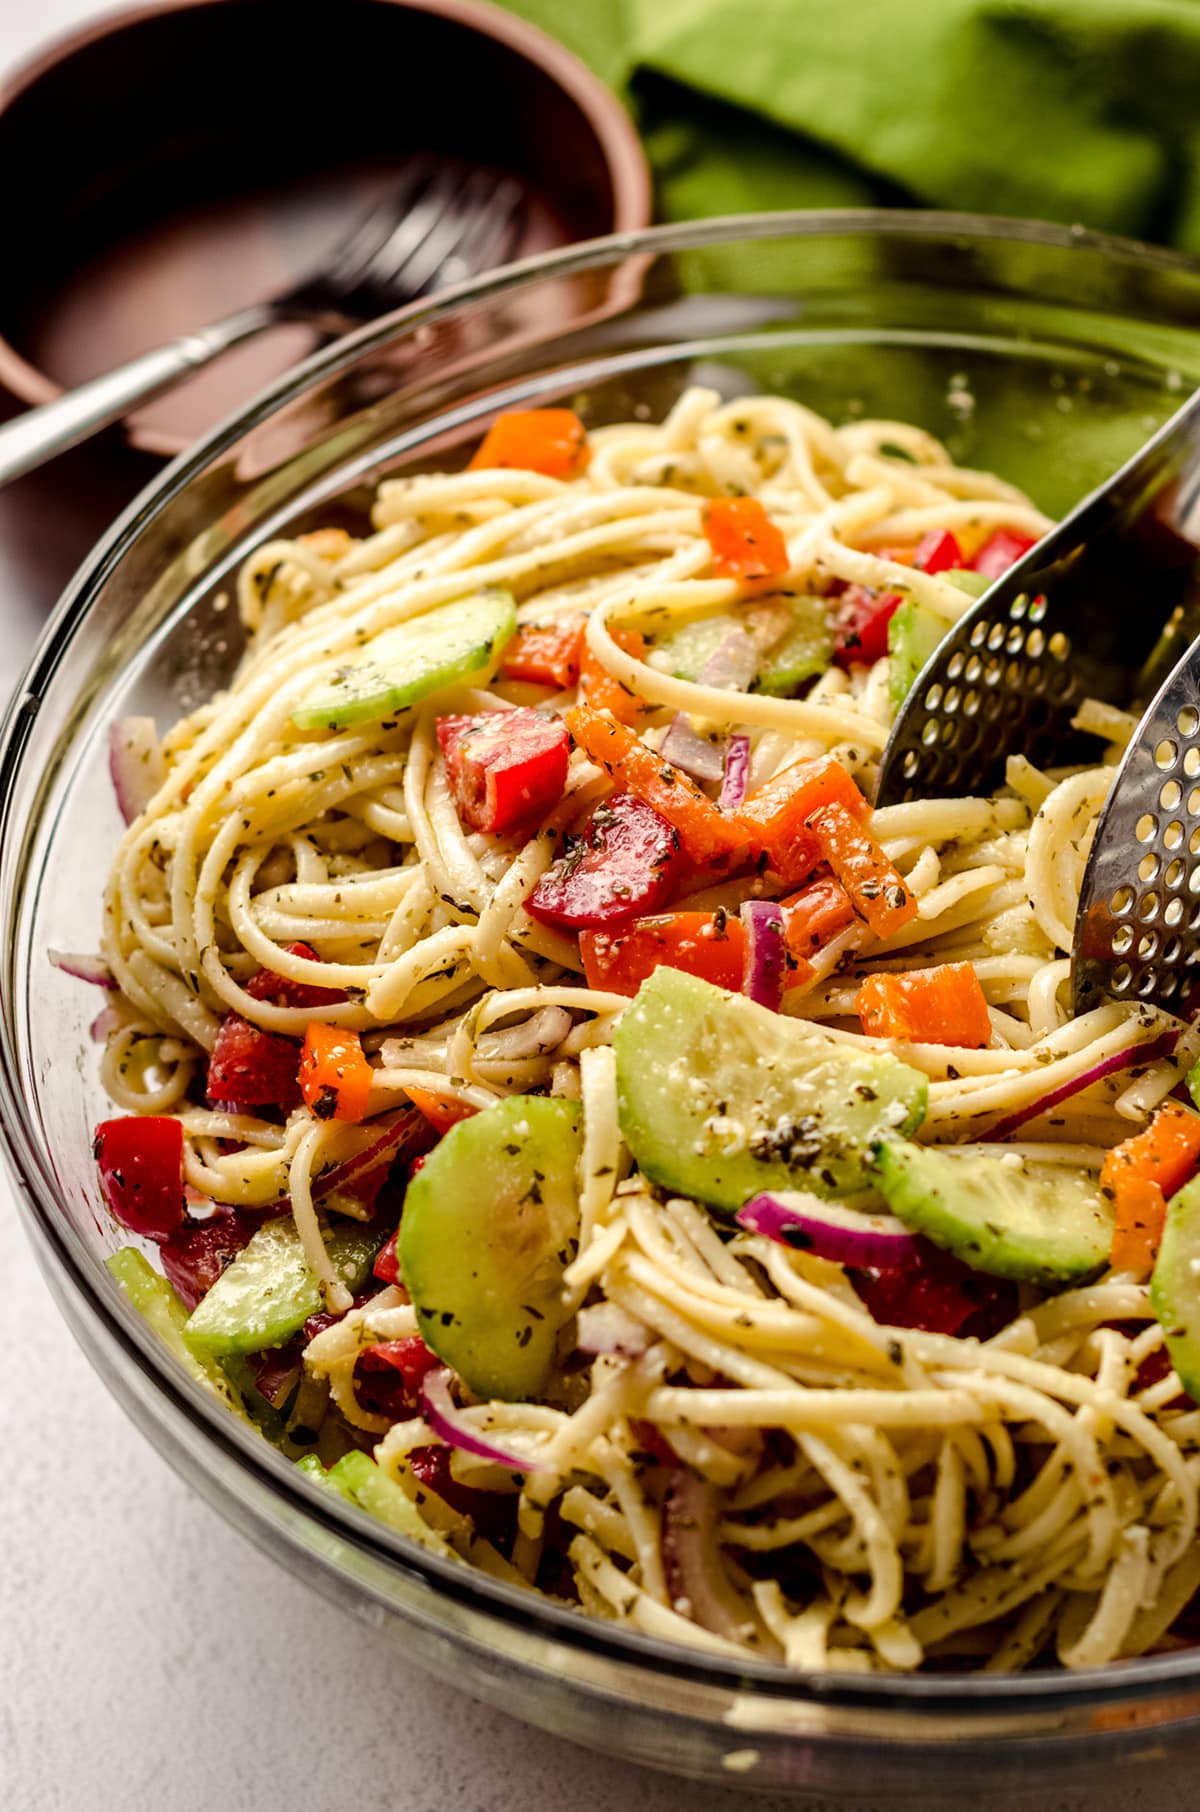 Tossing a cold pasta salad together with a pair of tongs.